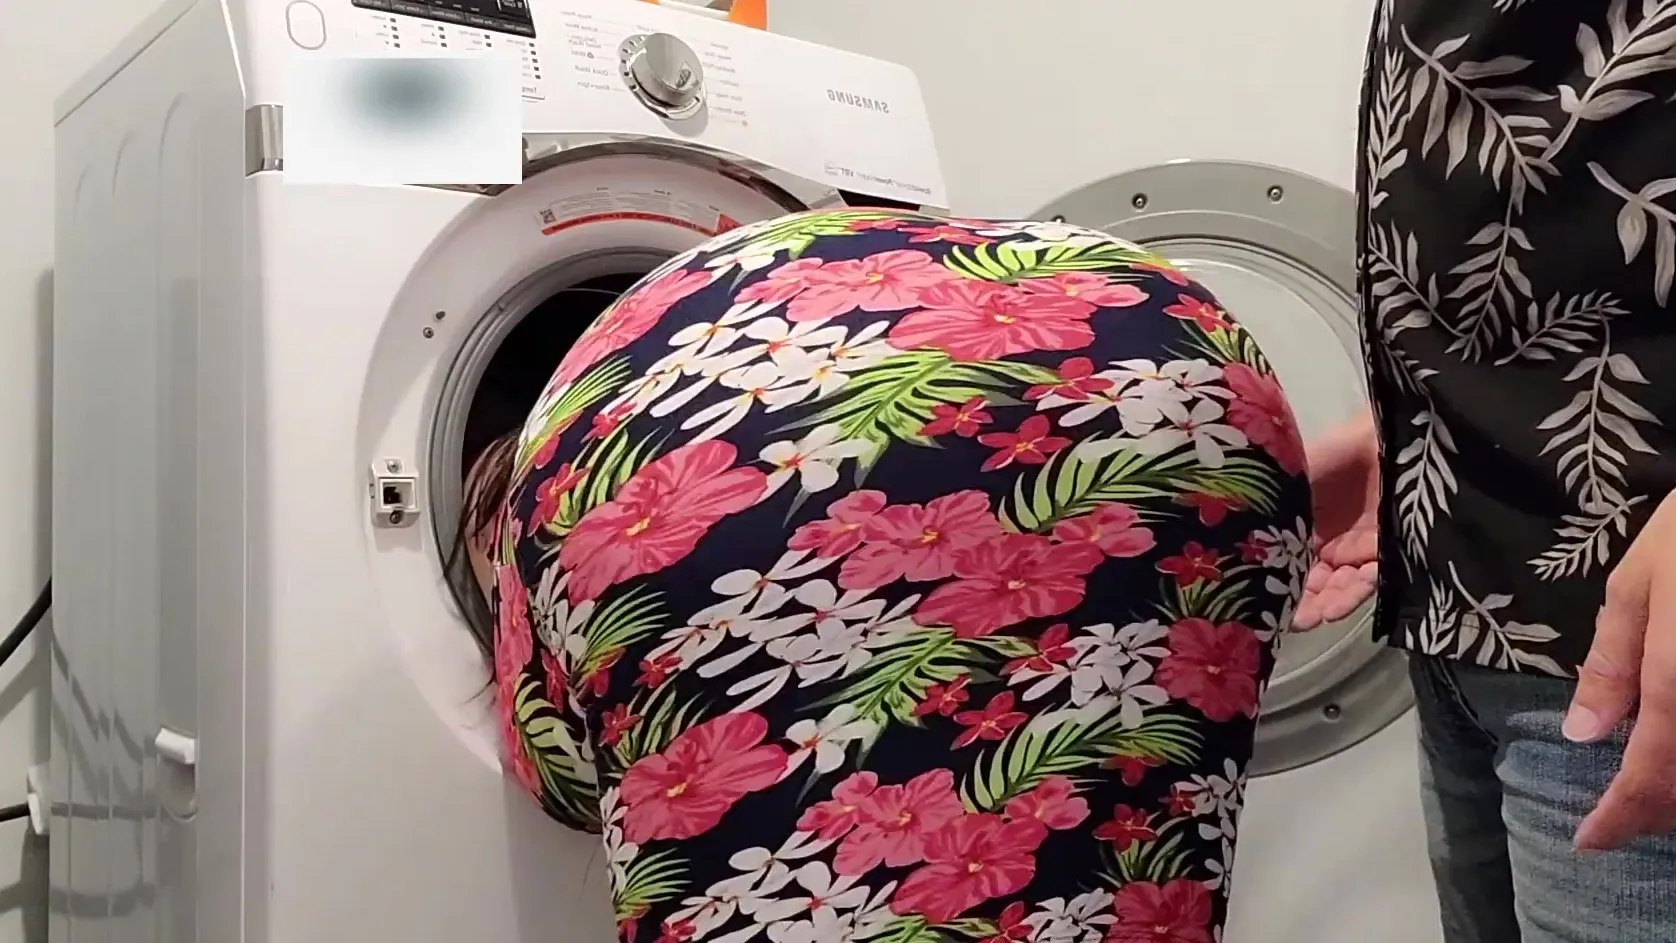 daneel van dyk recommends blonde showing tits on washing machine pic